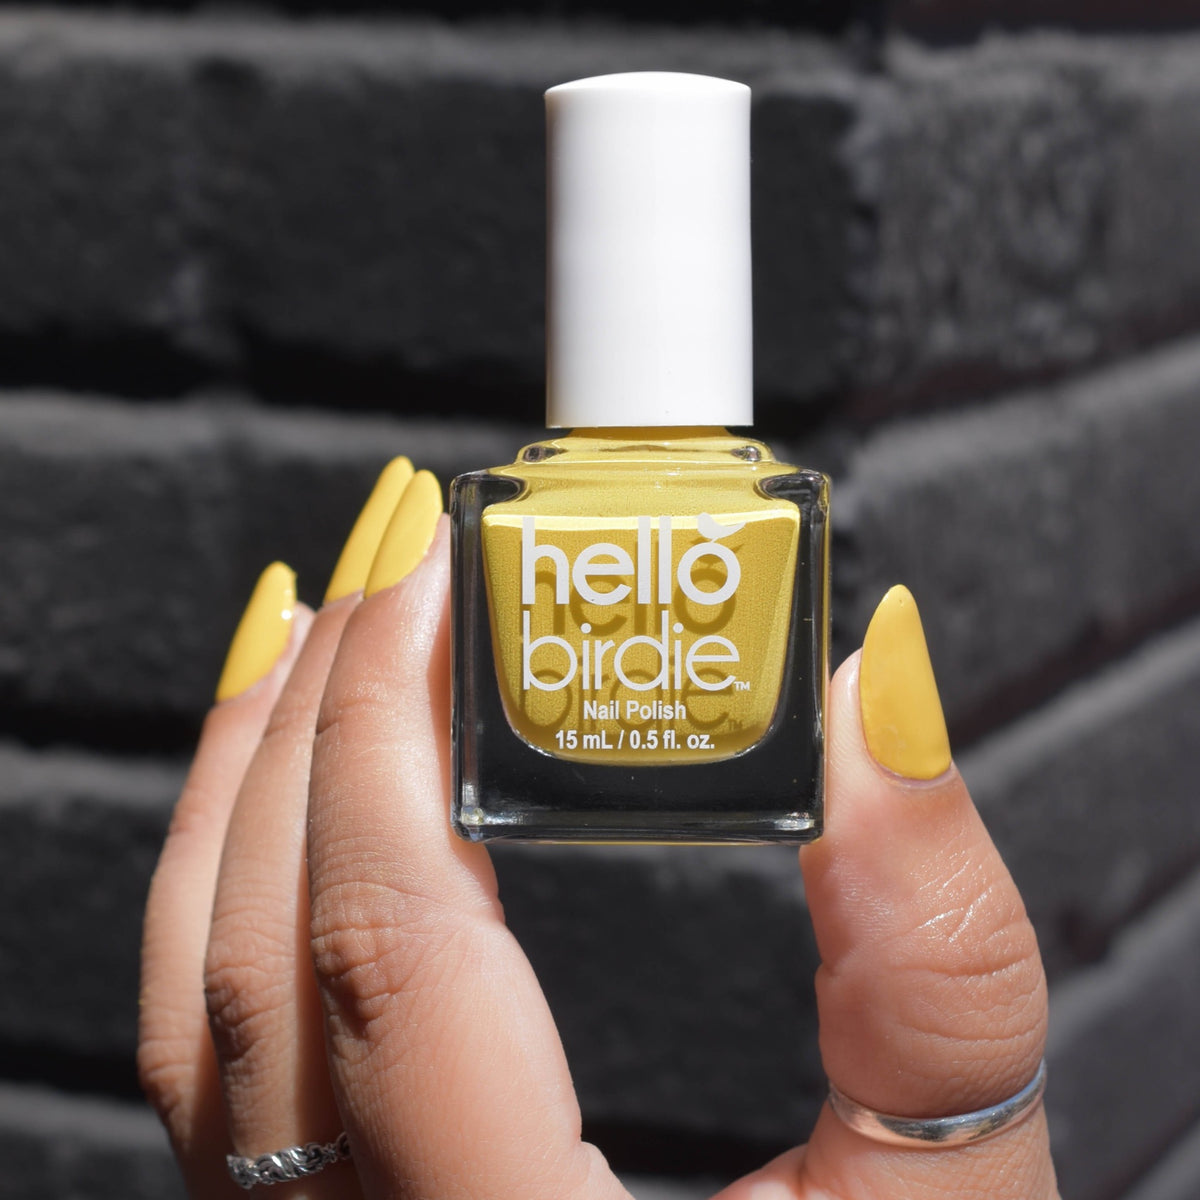 A close up of a model's medium toned fingers holding a bottle of Over Easy nail polish from Hello Birdie which is a deep yellow hue. The polish is painted on the nails and two fingers have silver rings. The background is a black brick corner which is out of focus.